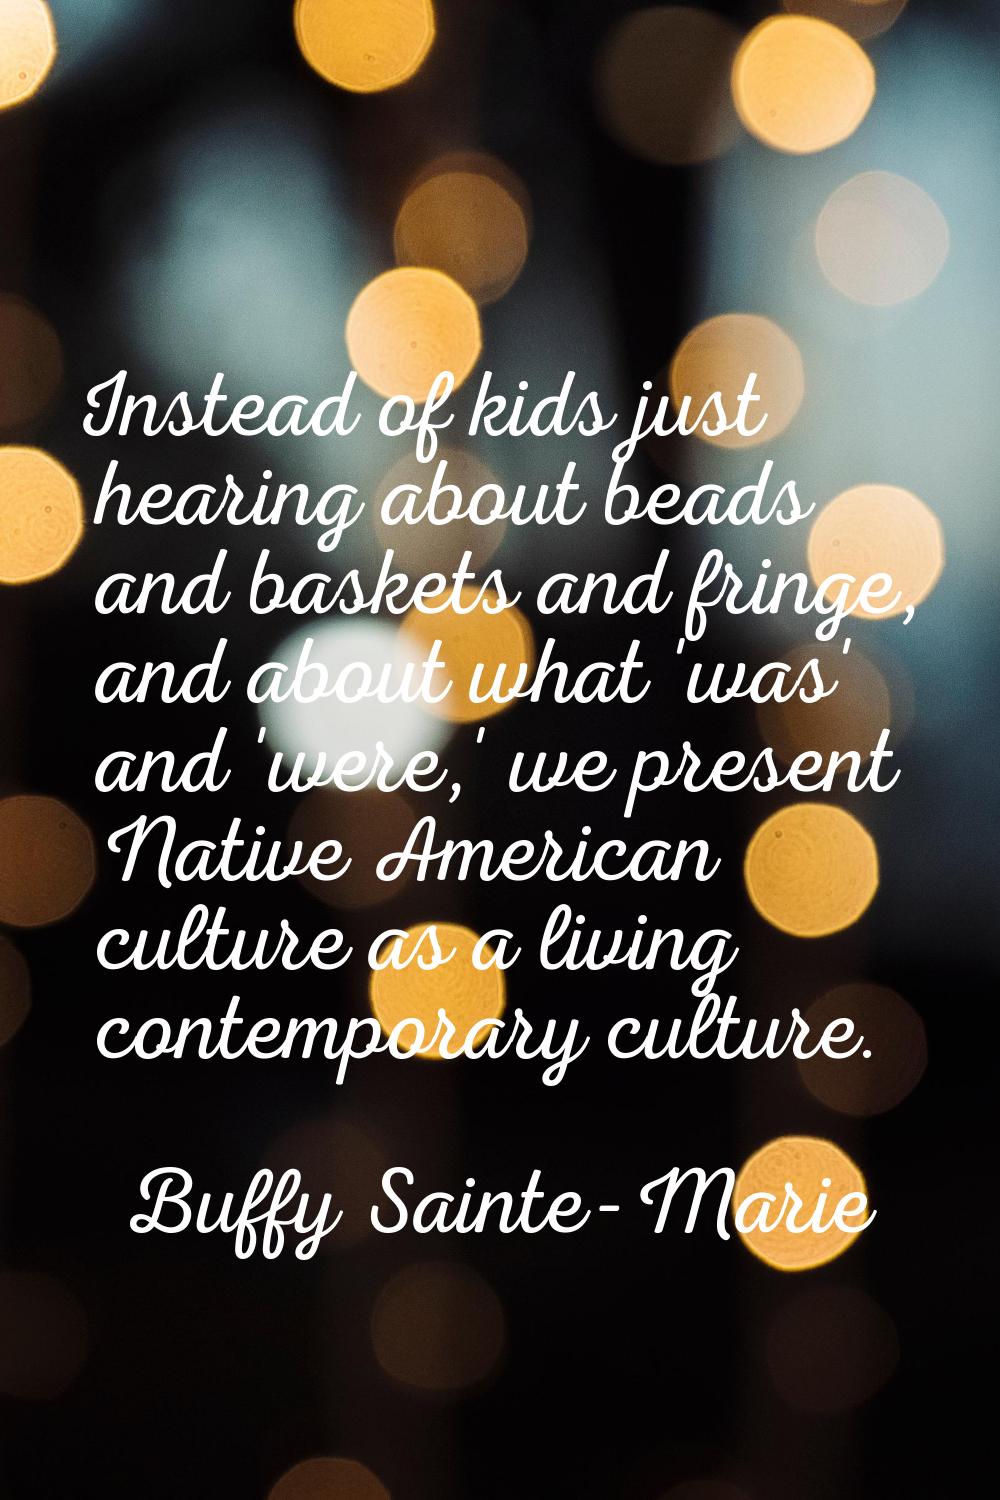 Instead of kids just hearing about beads and baskets and fringe, and about what 'was' and 'were,' w